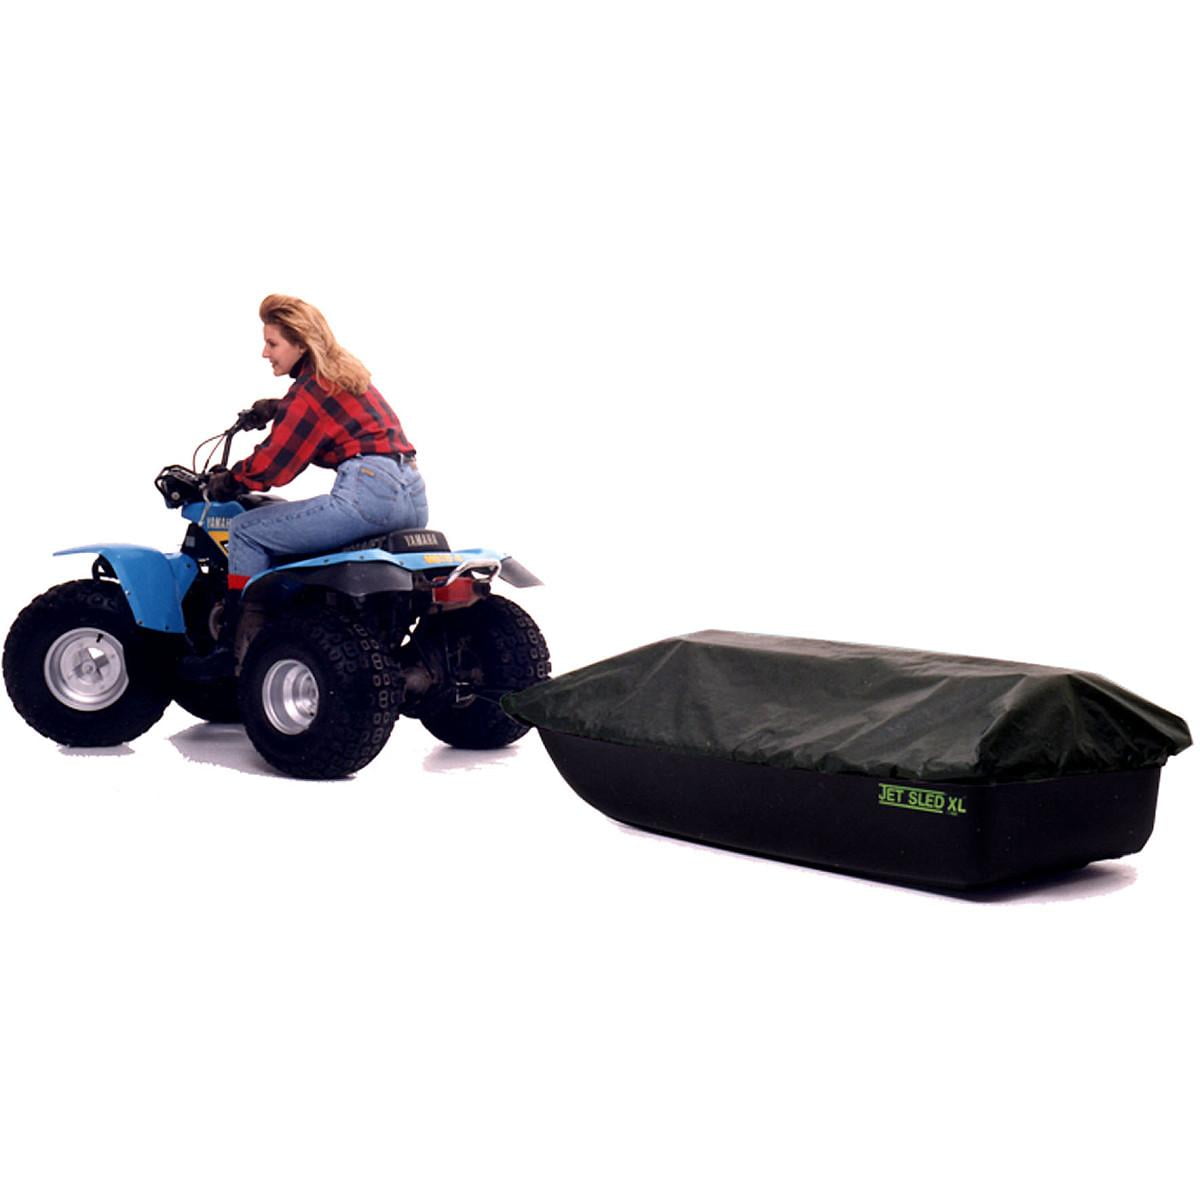 Shappell Jet Sled Cover, XL